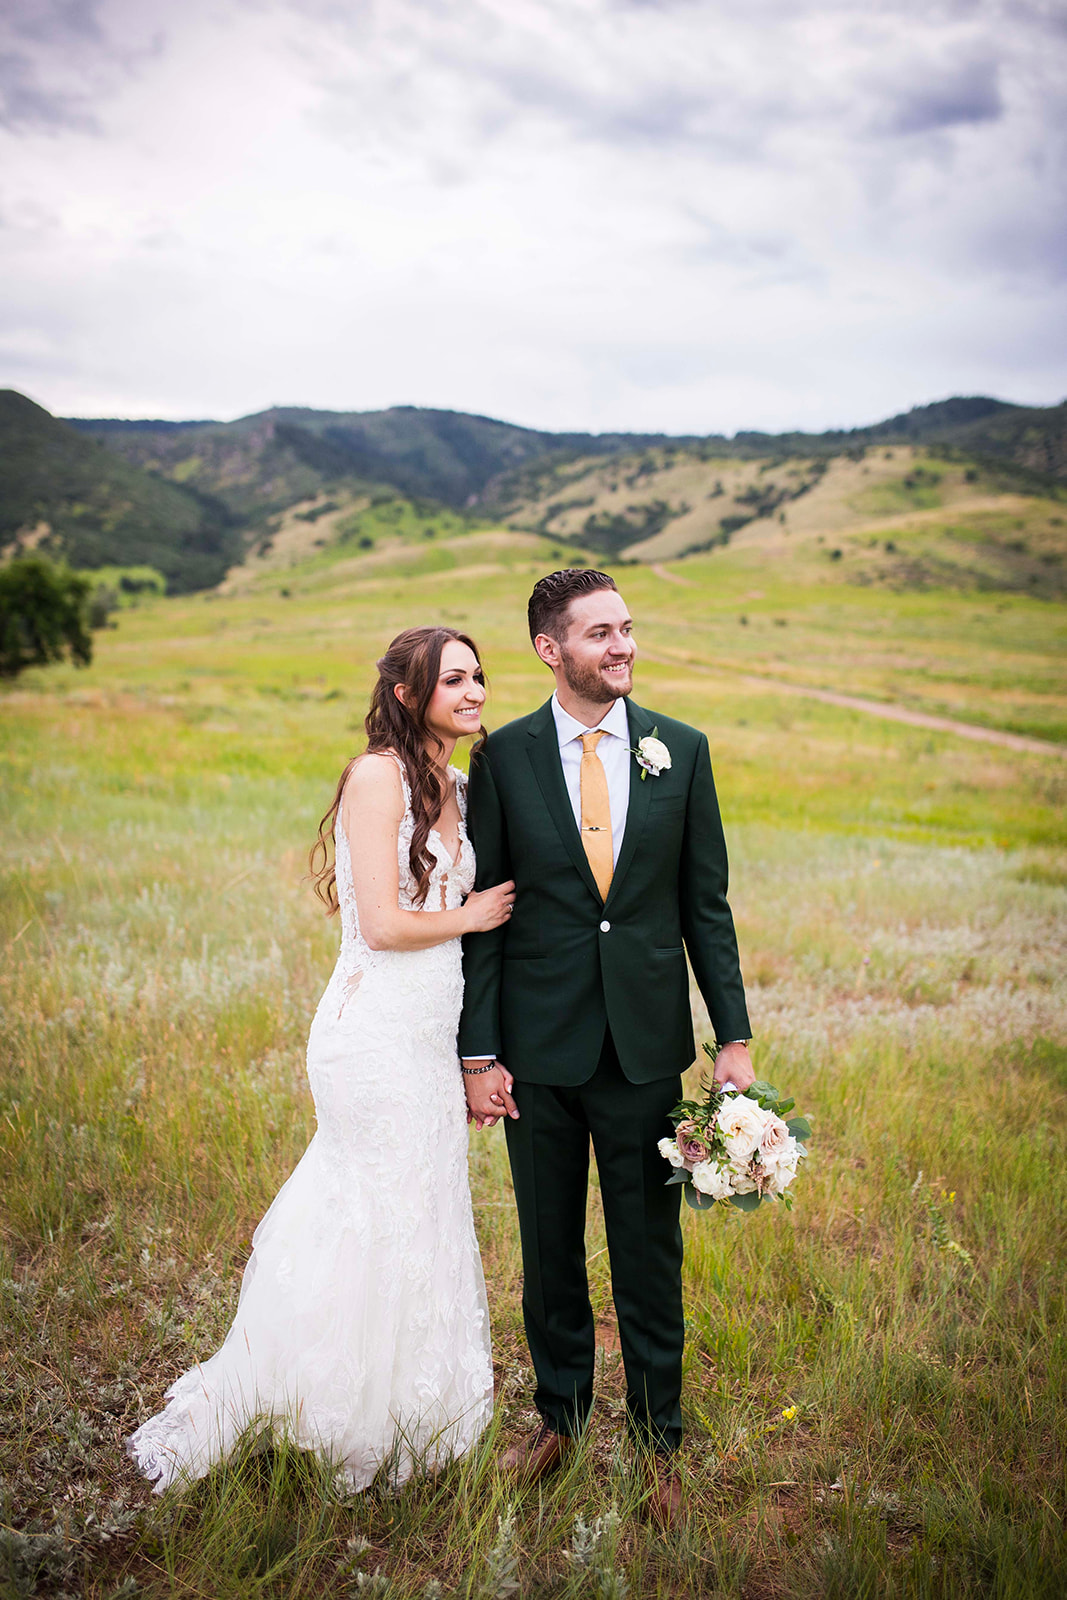 The bride and groom look off into the distance with the Colorado landscape in the background.